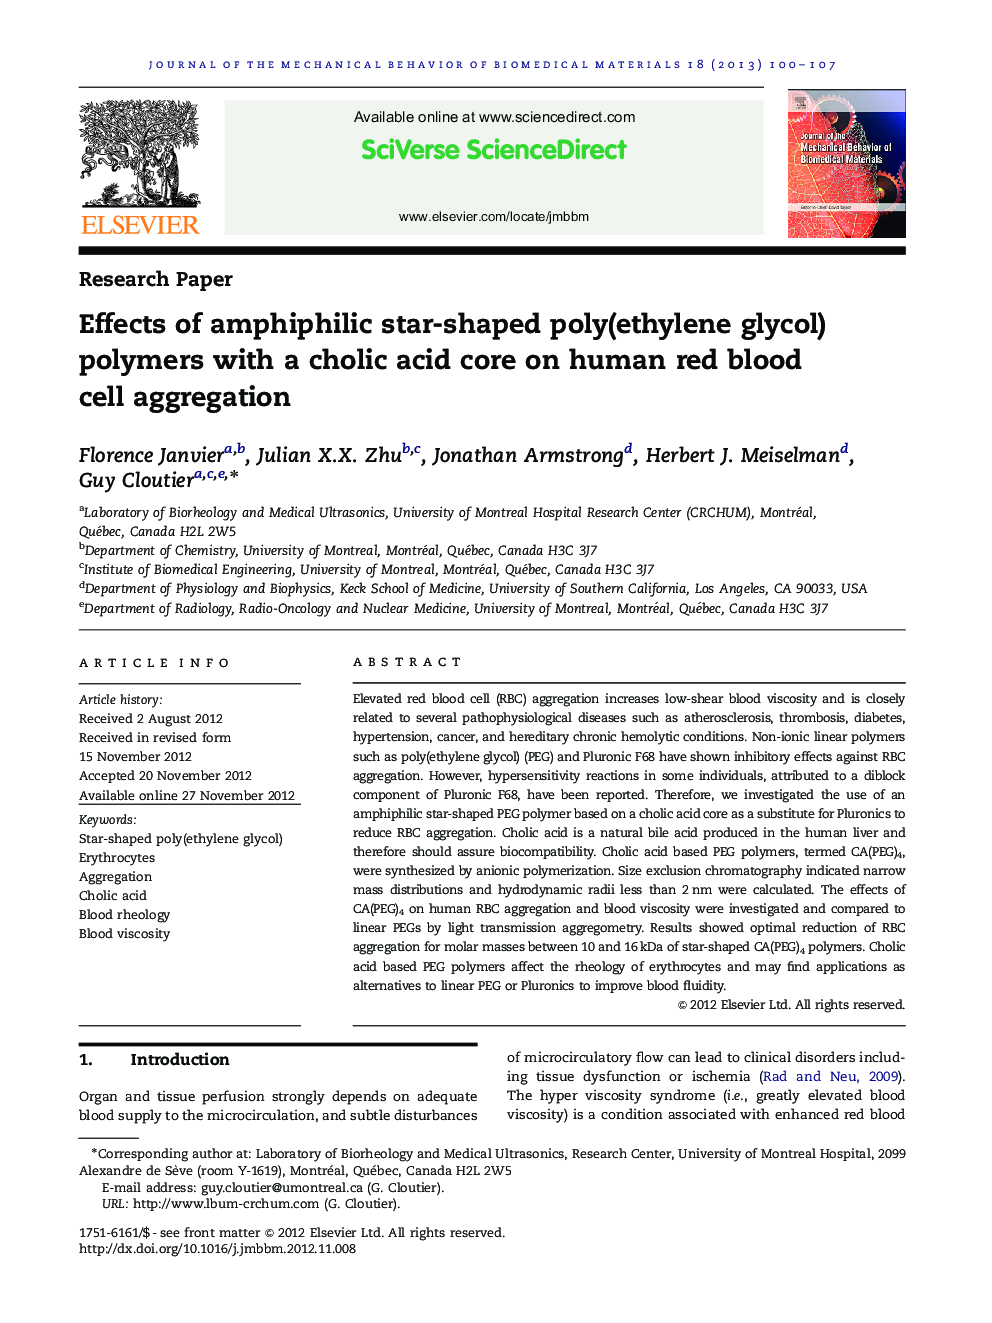 Effects of amphiphilic star-shaped poly(ethylene glycol) polymers with a cholic acid core on human red blood cell aggregation